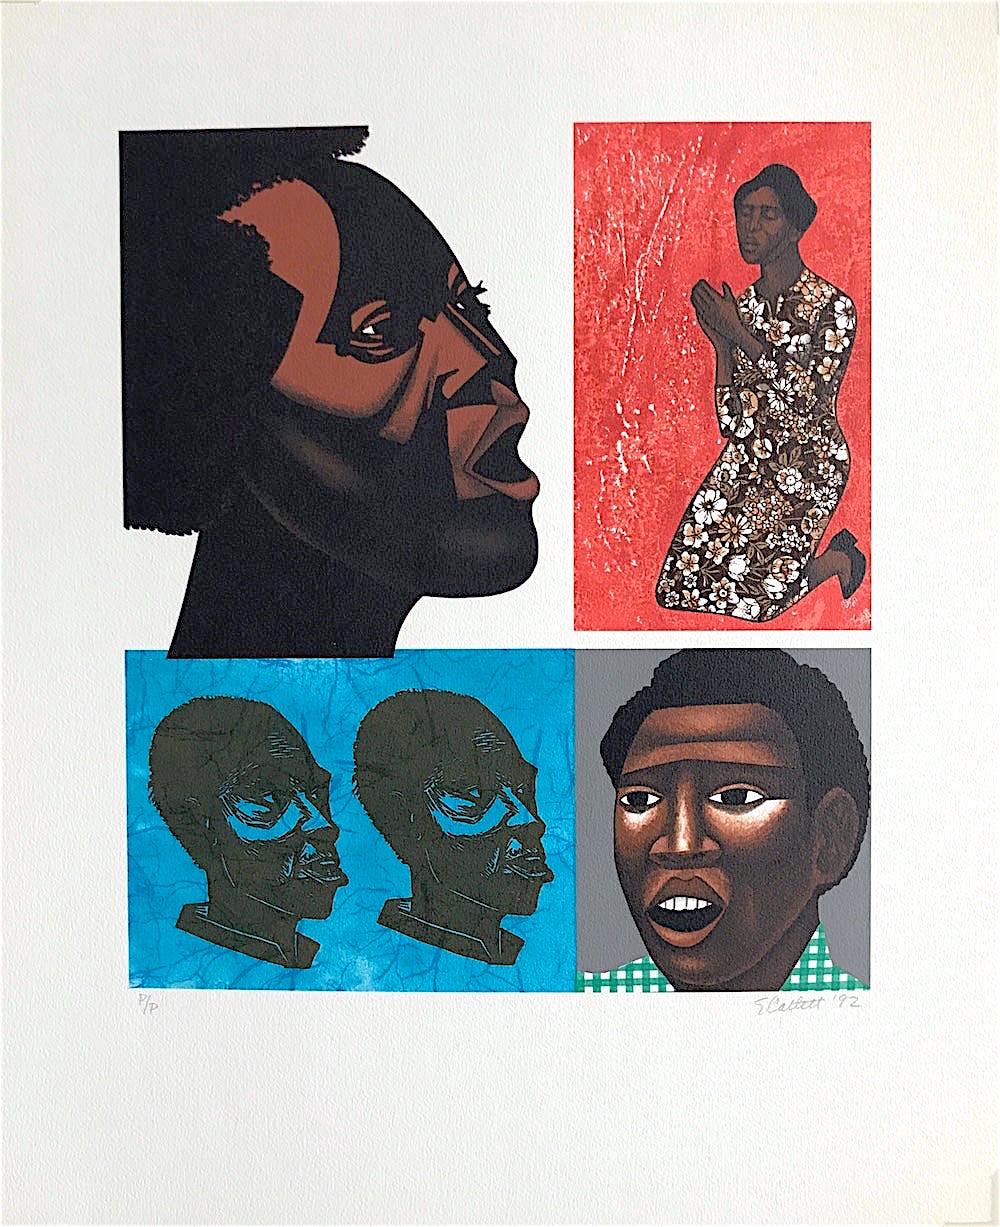 SINGING THEIR SONGS is a hand drawn limited edition lithograph printed using traditional hand lithography methods on archival Arches paper, 100% acid free created by the highly acclaimed African-American woman artist Elizabeth Catlett, master